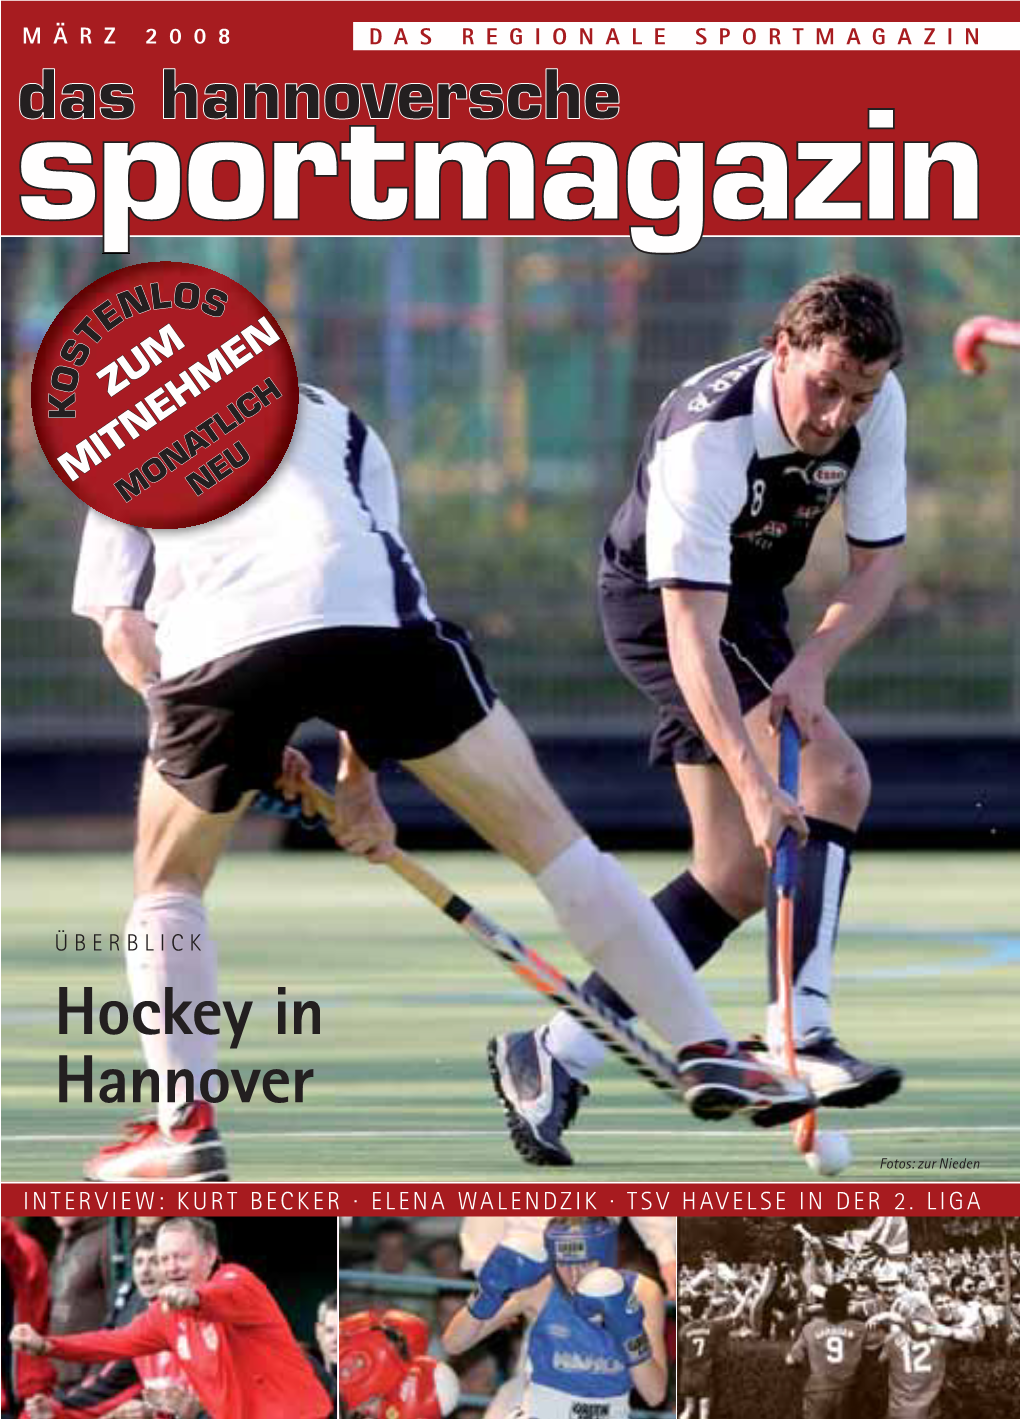 Hockey in Hannover